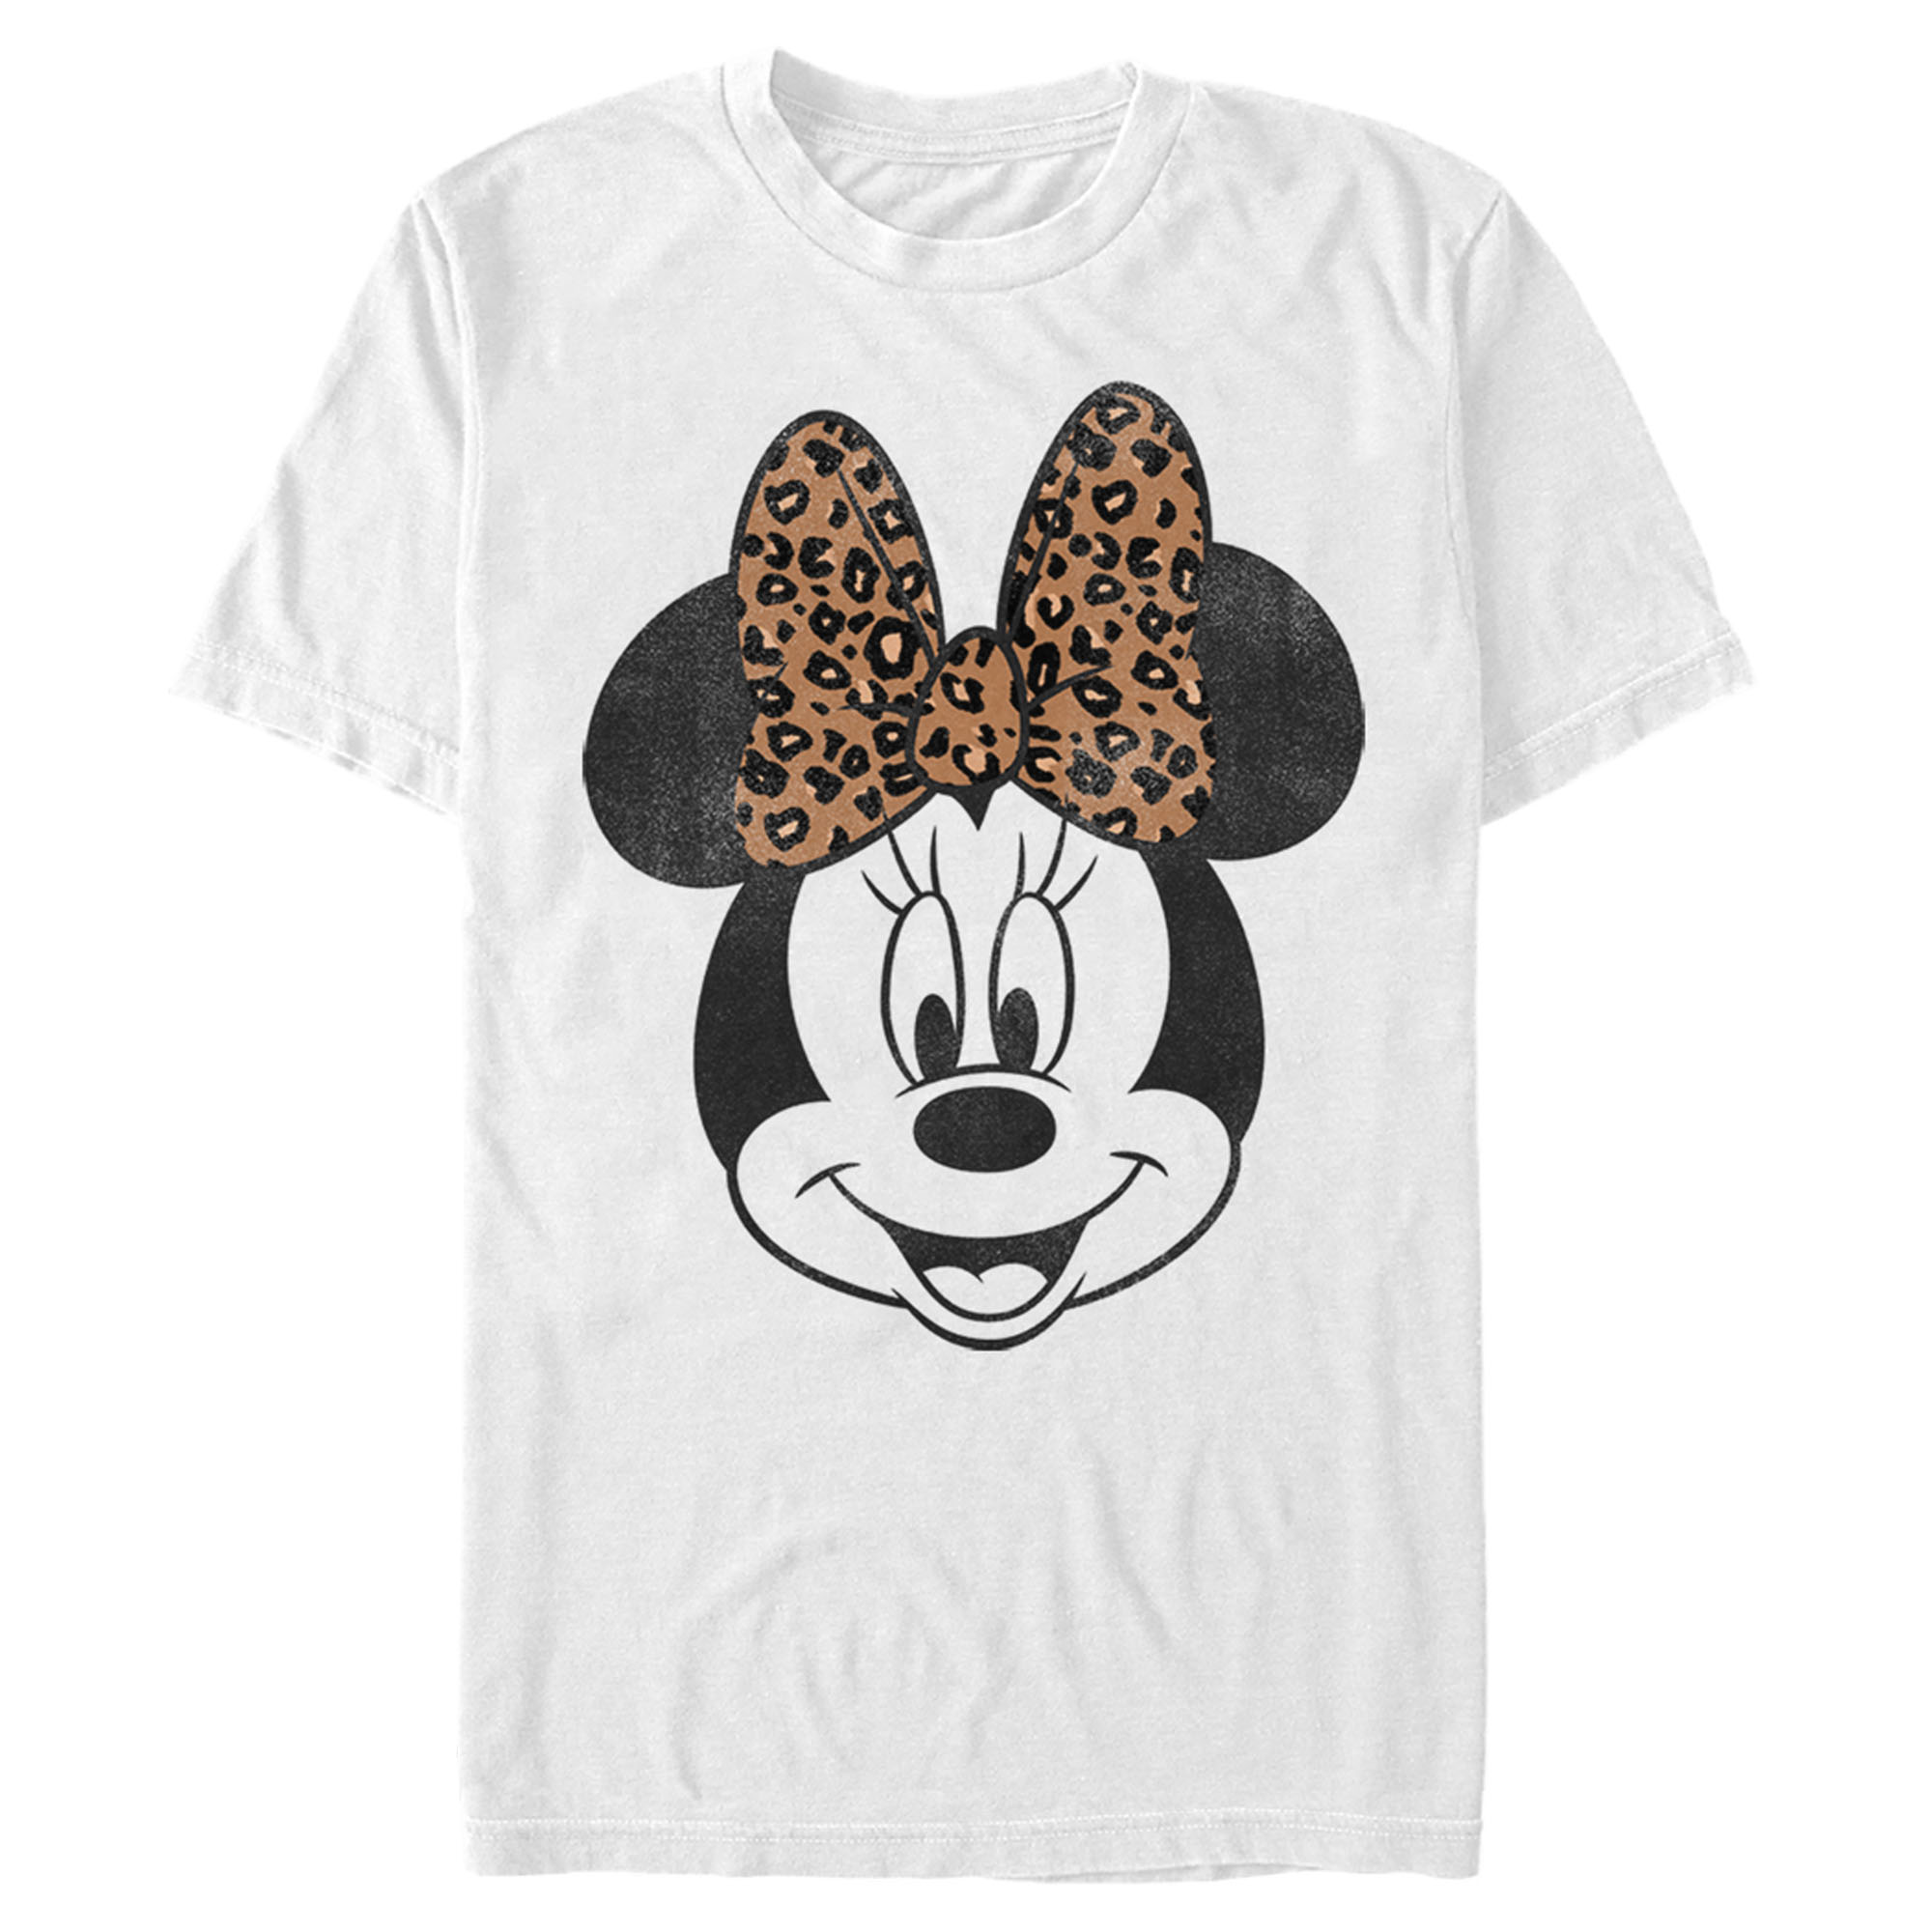 Men's Mickey & Friends Minnie Mouse Cheetah Print Bow  Graphic Tee White Medium - image 1 of 4